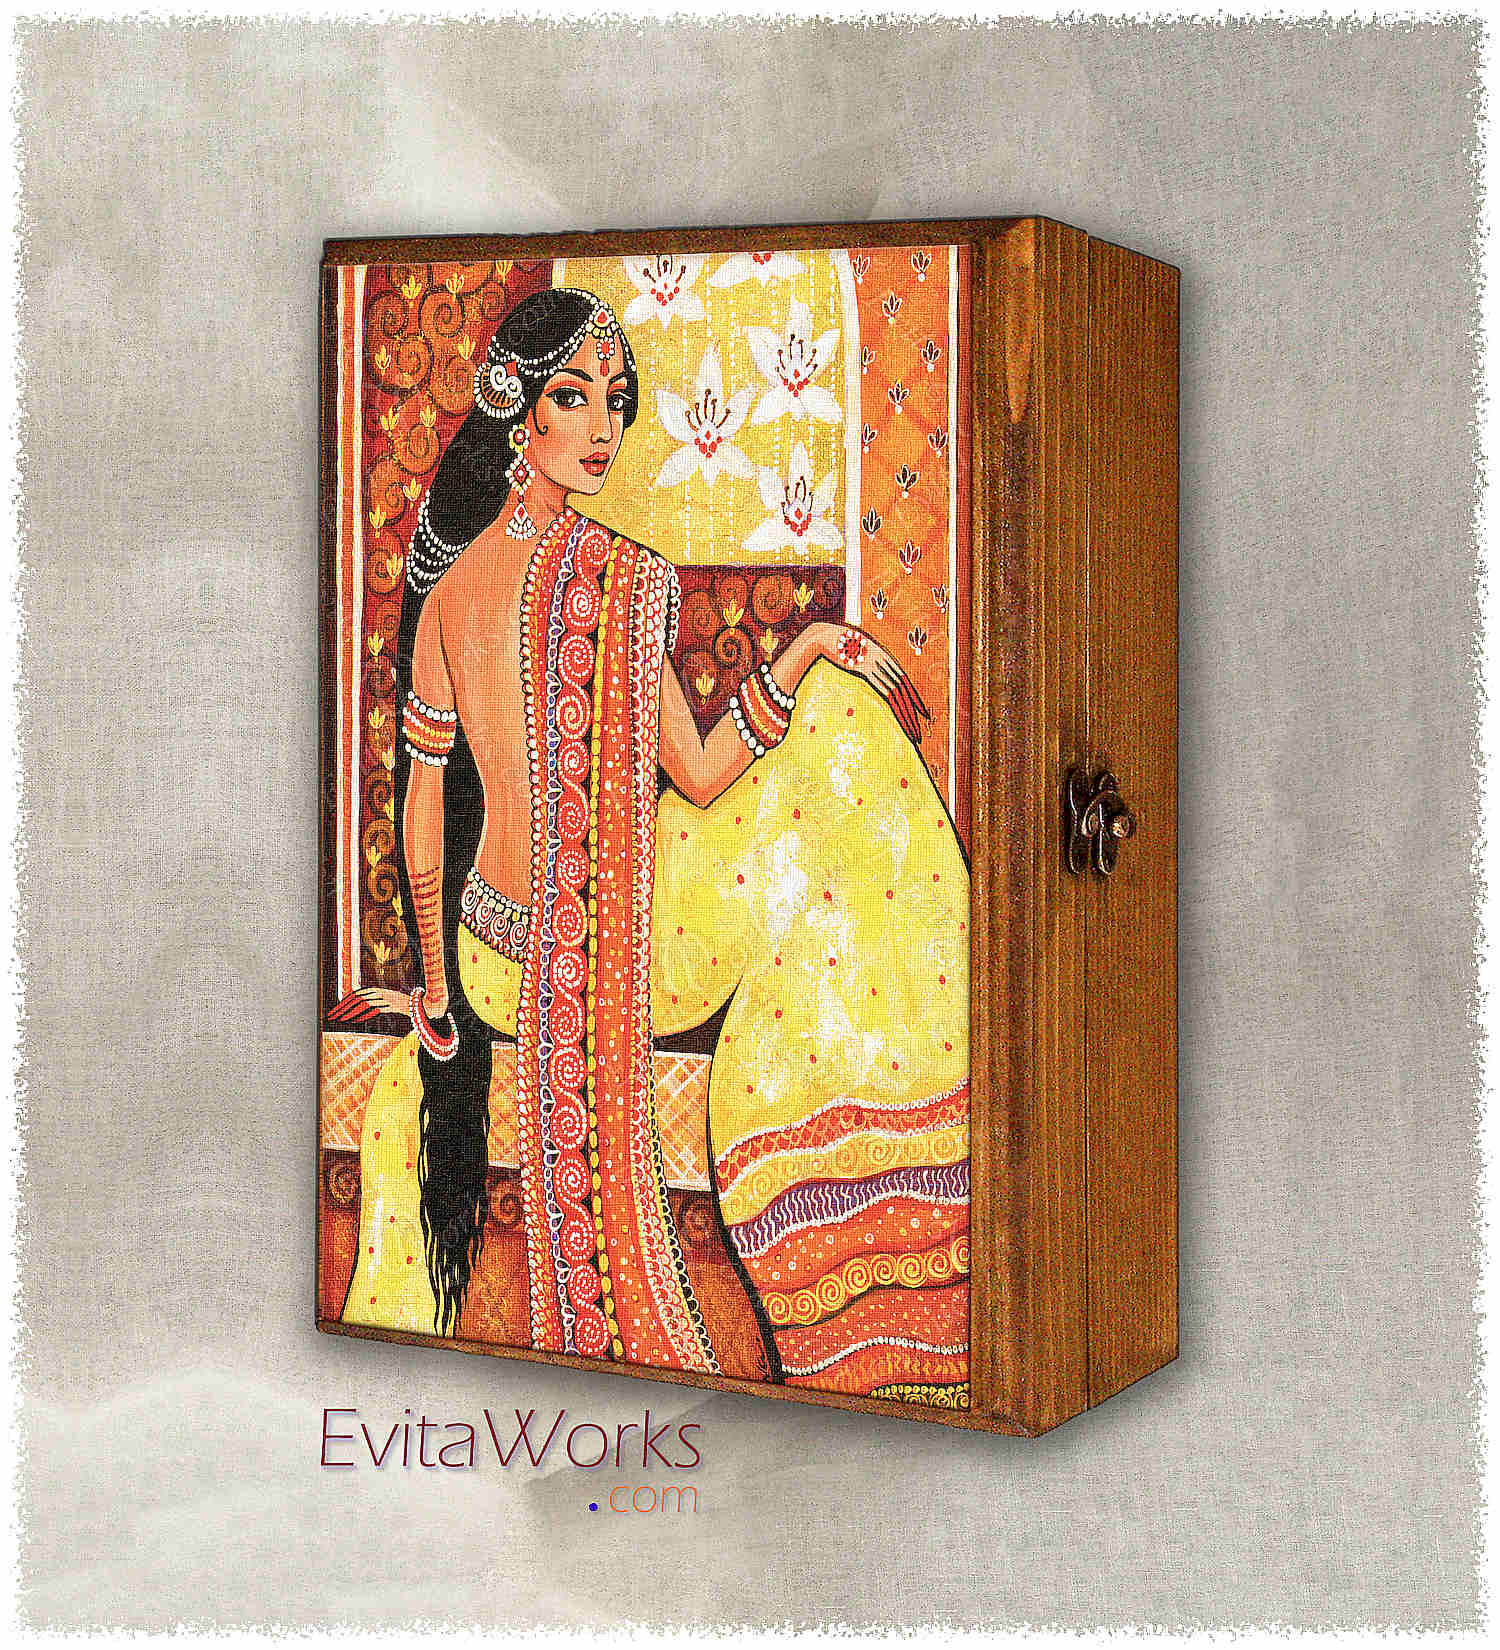 Hit to learn about "Bharat, Indian woman art" on jewelboxes